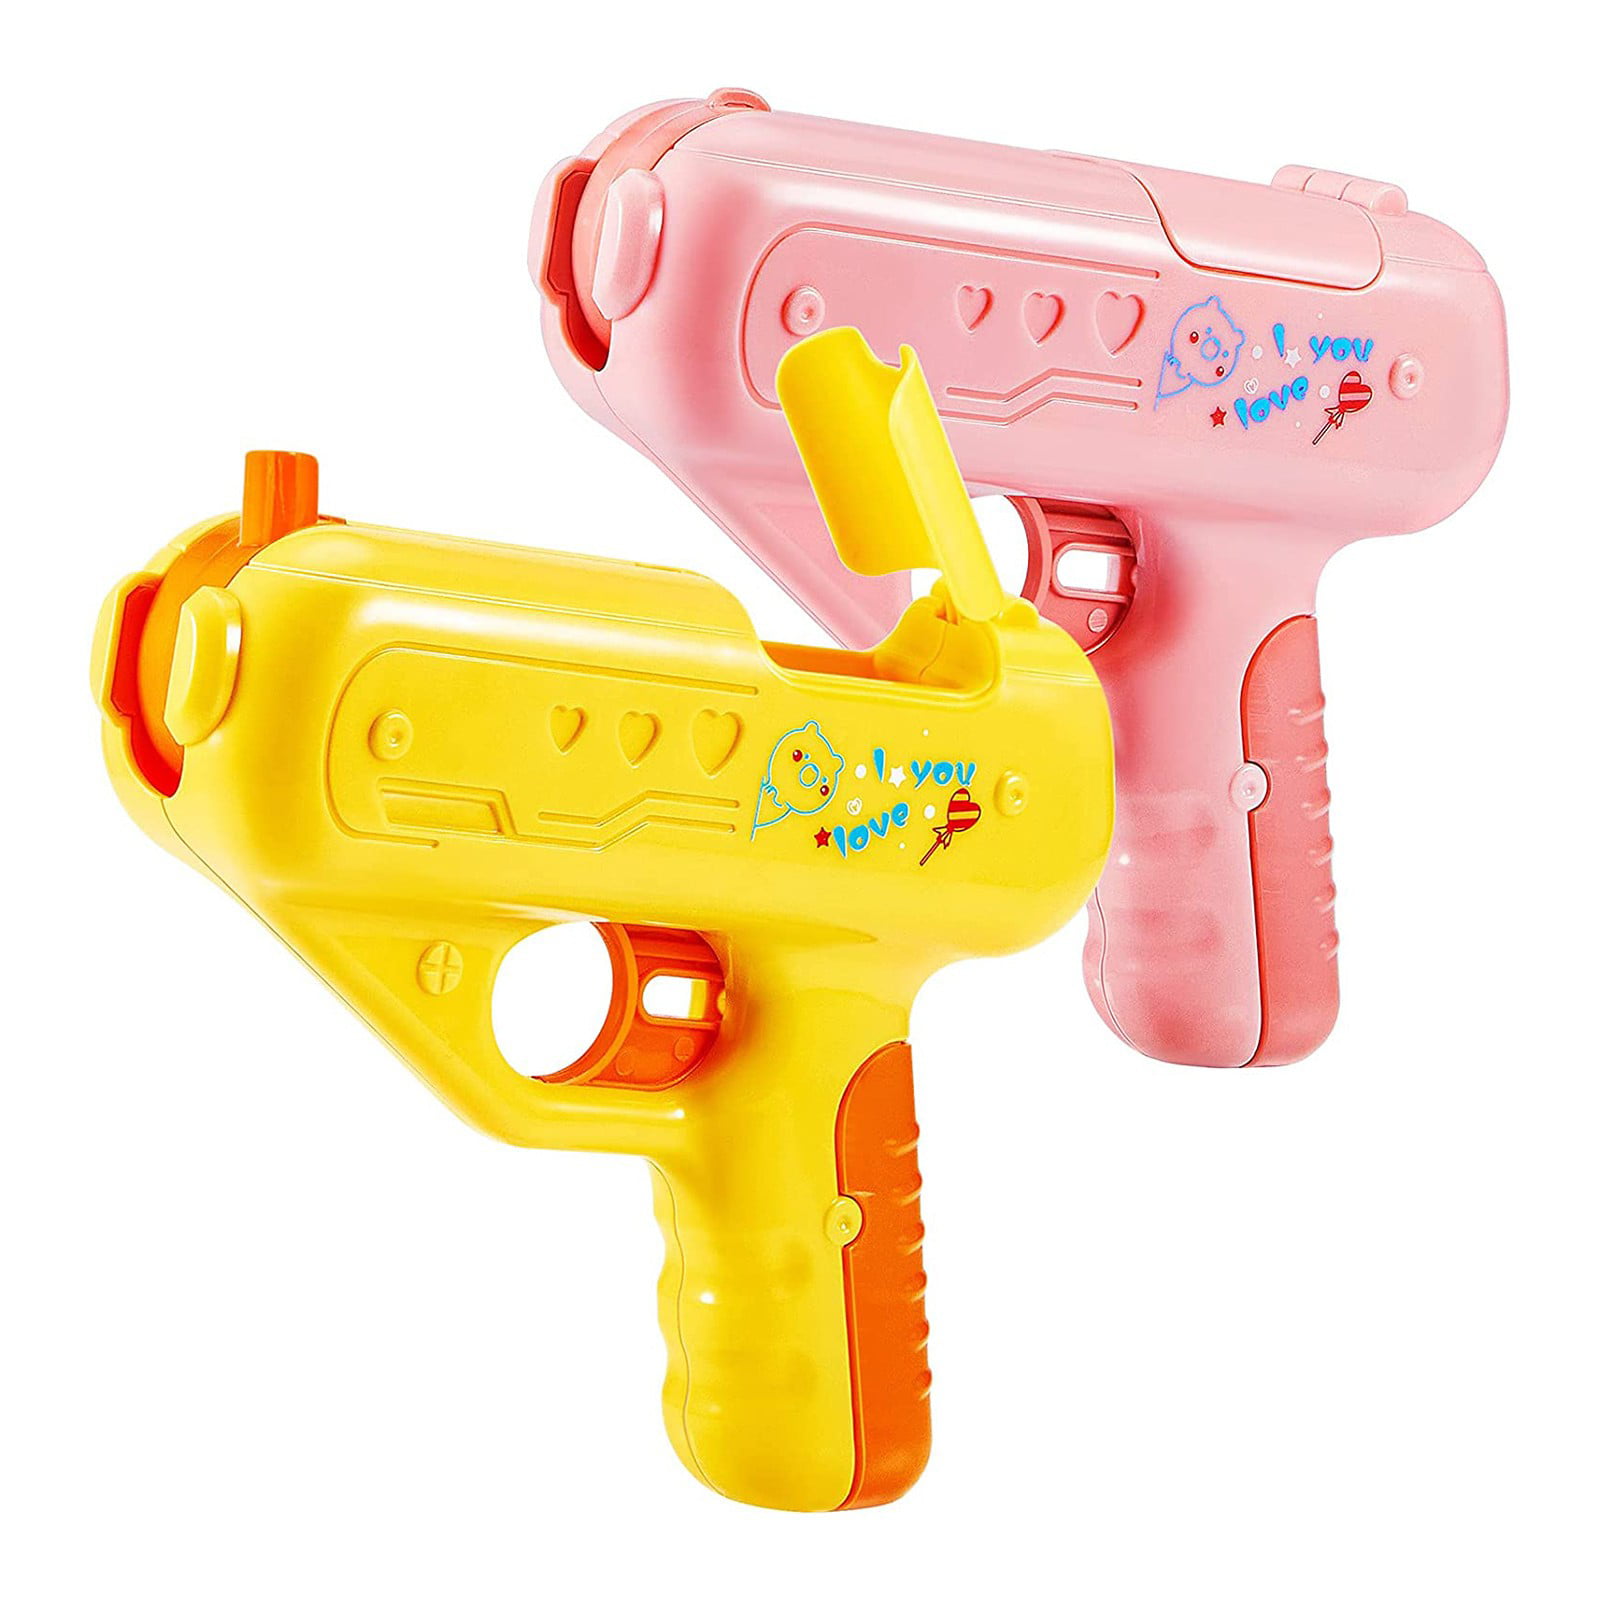 Ring Shooter toy plastic gun NIP shoots plastic rings up to 20 feet ages 3